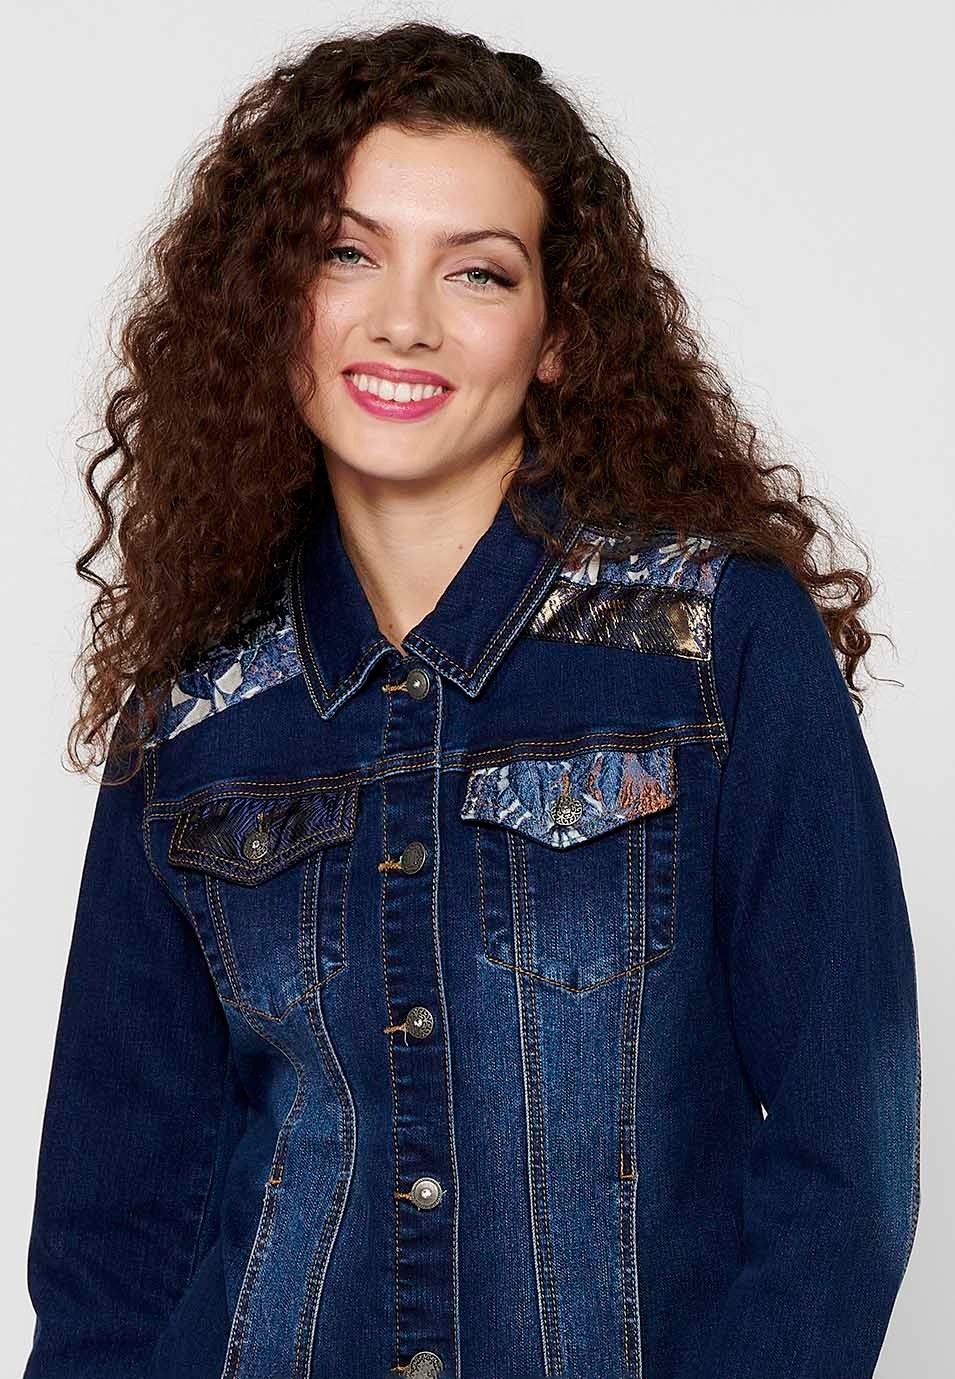 Dark Blue Long Sleeve Denim Jacket with Button Front Closure and Pockets with Embroidery on the Shoulders for Women 8